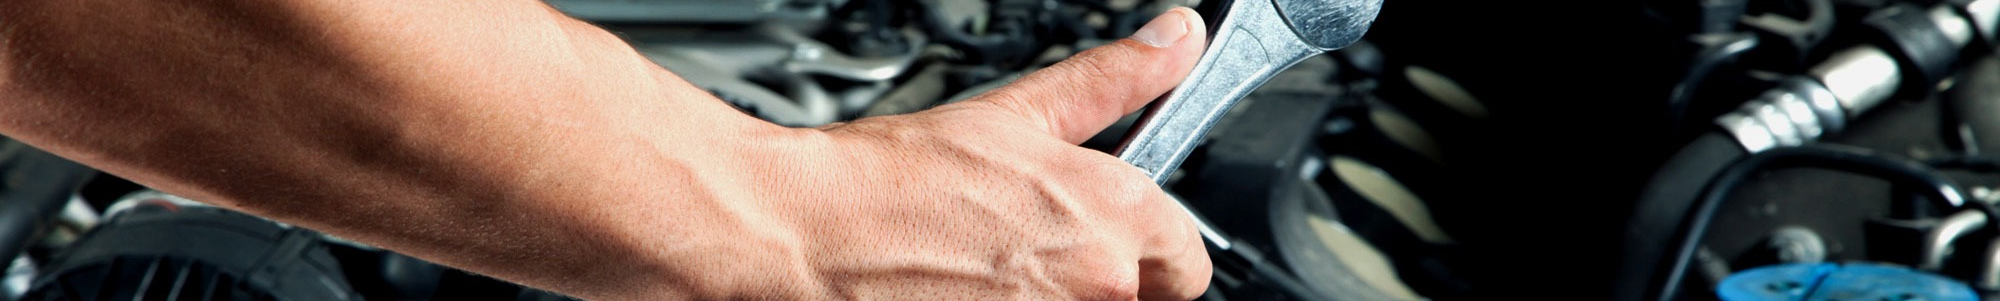 Derek Merson offers a Vehicle Service Centre for all servicing and repairs